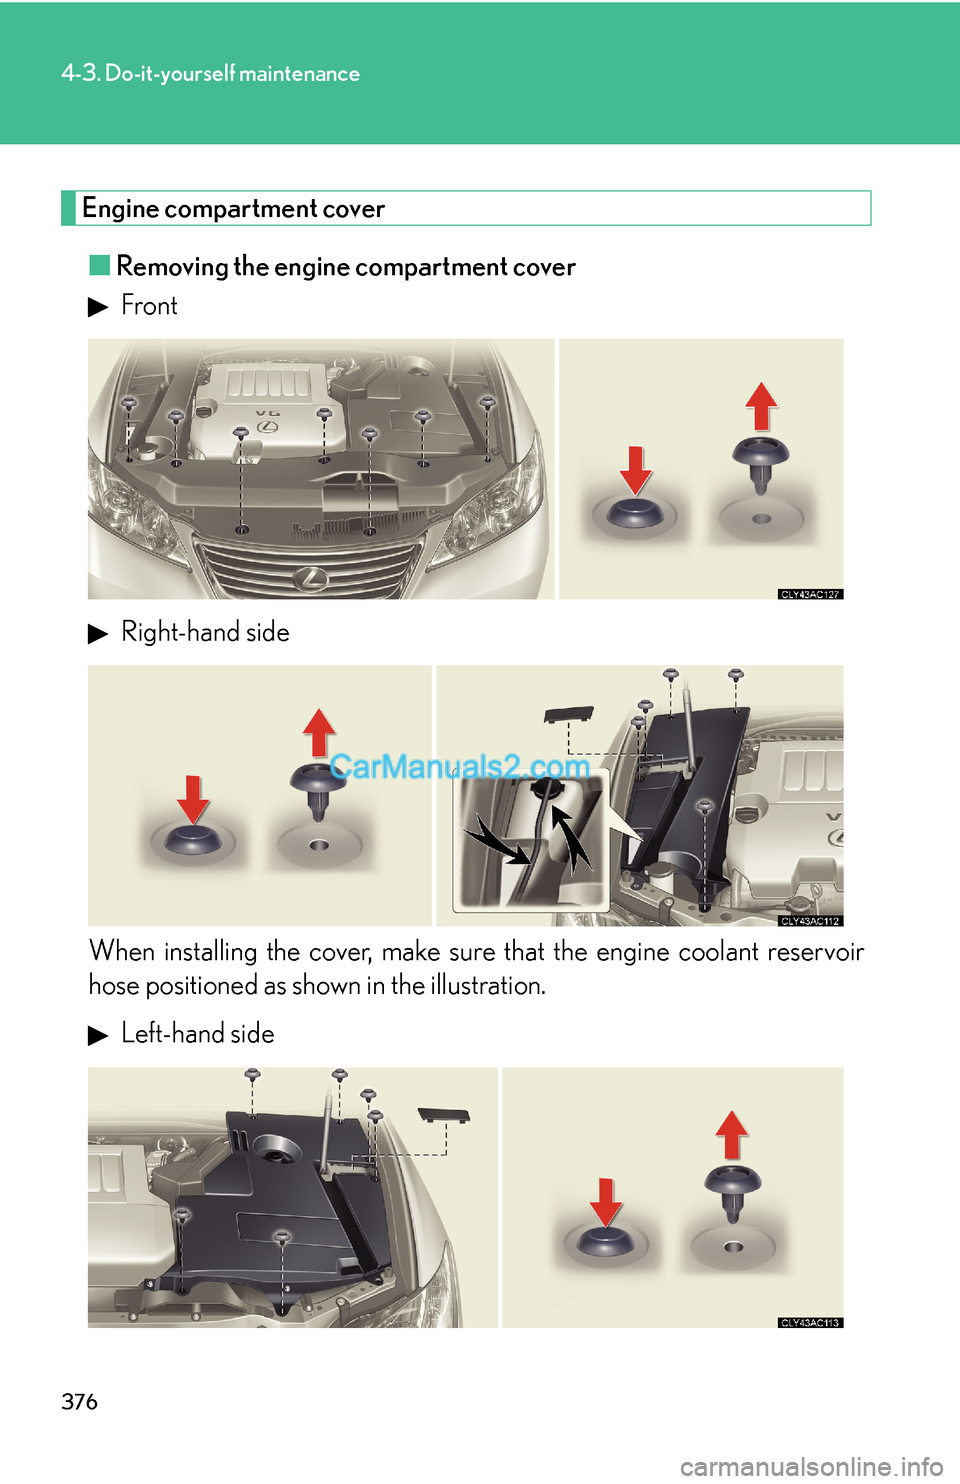 Lexus ES350 2010  Do-It-Yourself Maintenance 376
4-3. Do-it-yourself maintenance
Engine compartment cover
■Removing the engine compartment cover
 Front
 Right-hand side
When installing the cover, make sure that the engine coolant reservoir 
ho